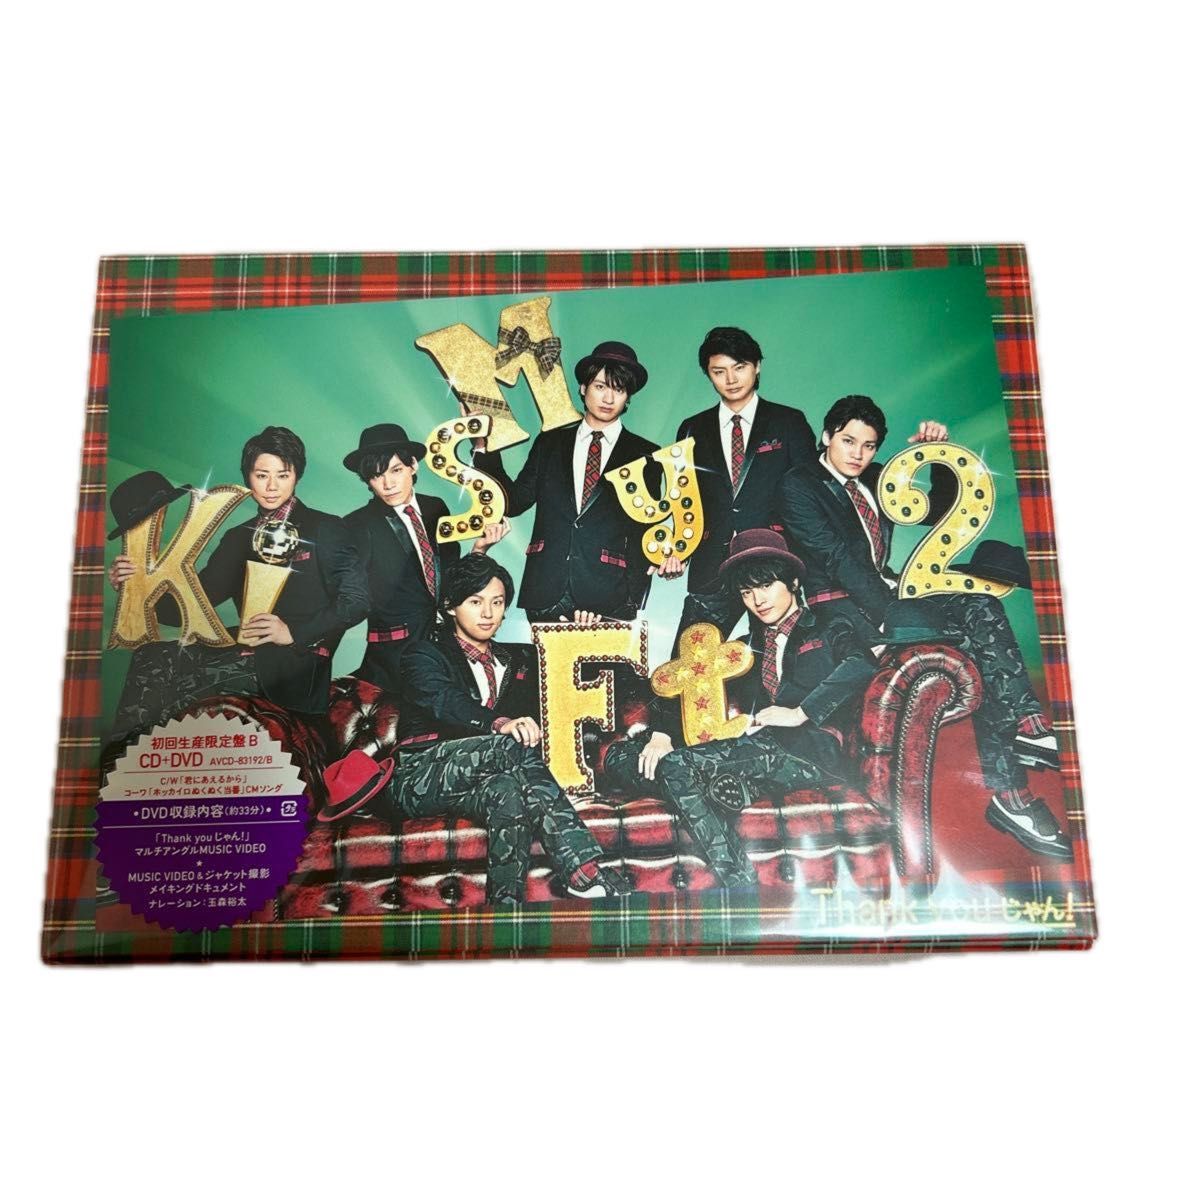 Kis-My-Ft2  キスマイ　Thank youじゃん 初回生産限定盤B(CD+DVD)